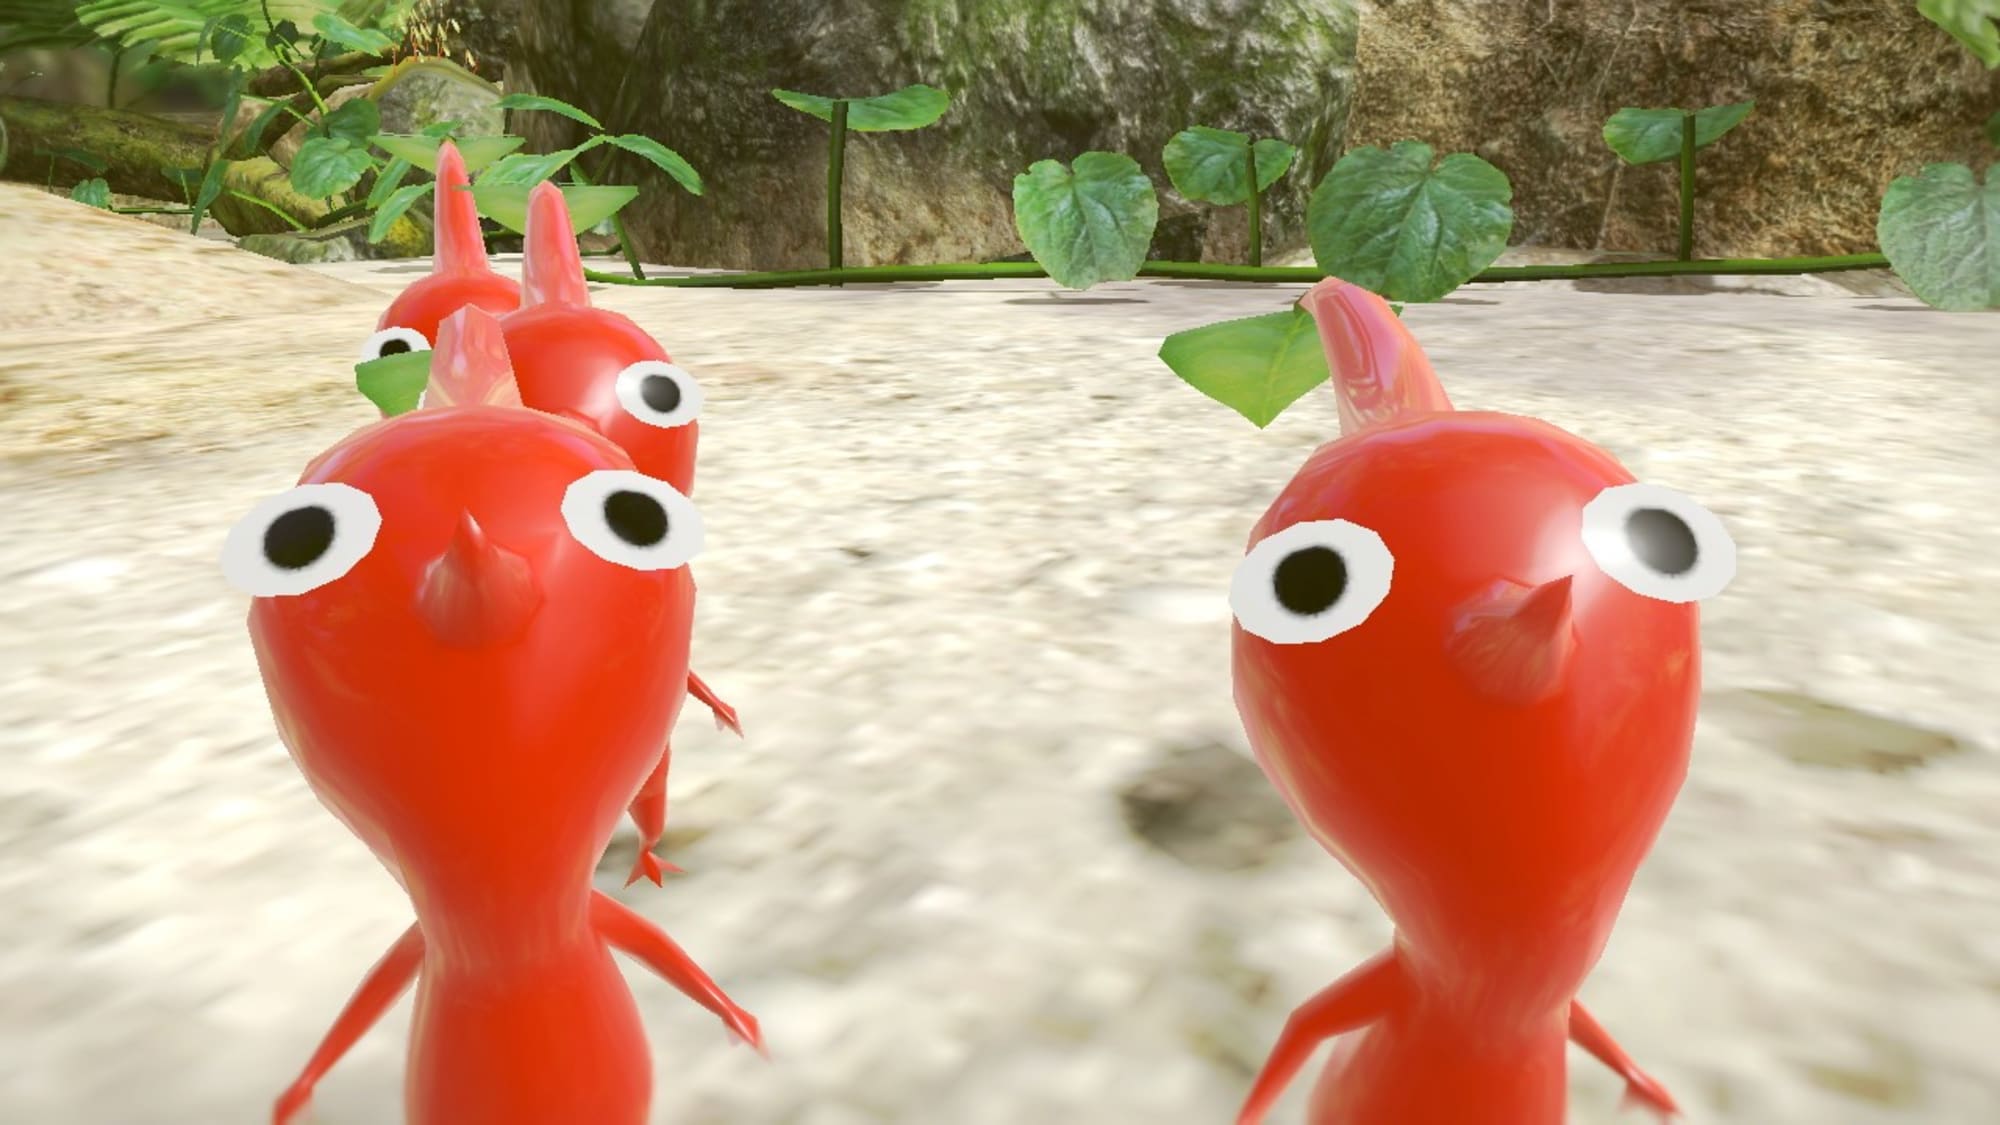 pikmin 3 deluxe switch release date